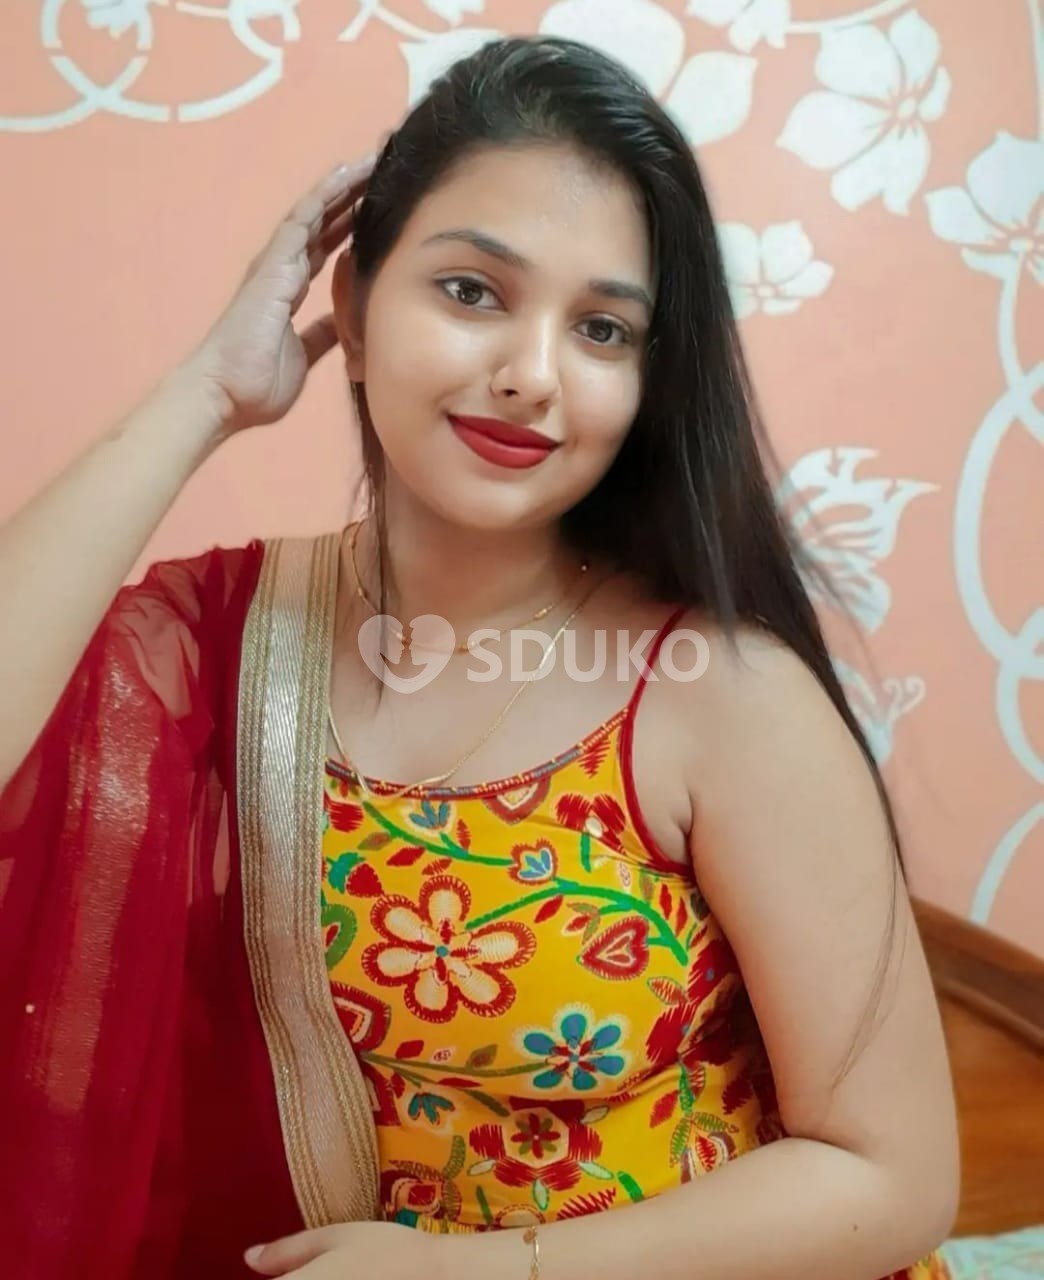 INDEPENDENT kannur MY SELF DIVYA SHARMA 1500 UNLIMITED SHOT ENJOYMENT HIGH PROFILE GIRLS AVAILABLE About me hello gentle